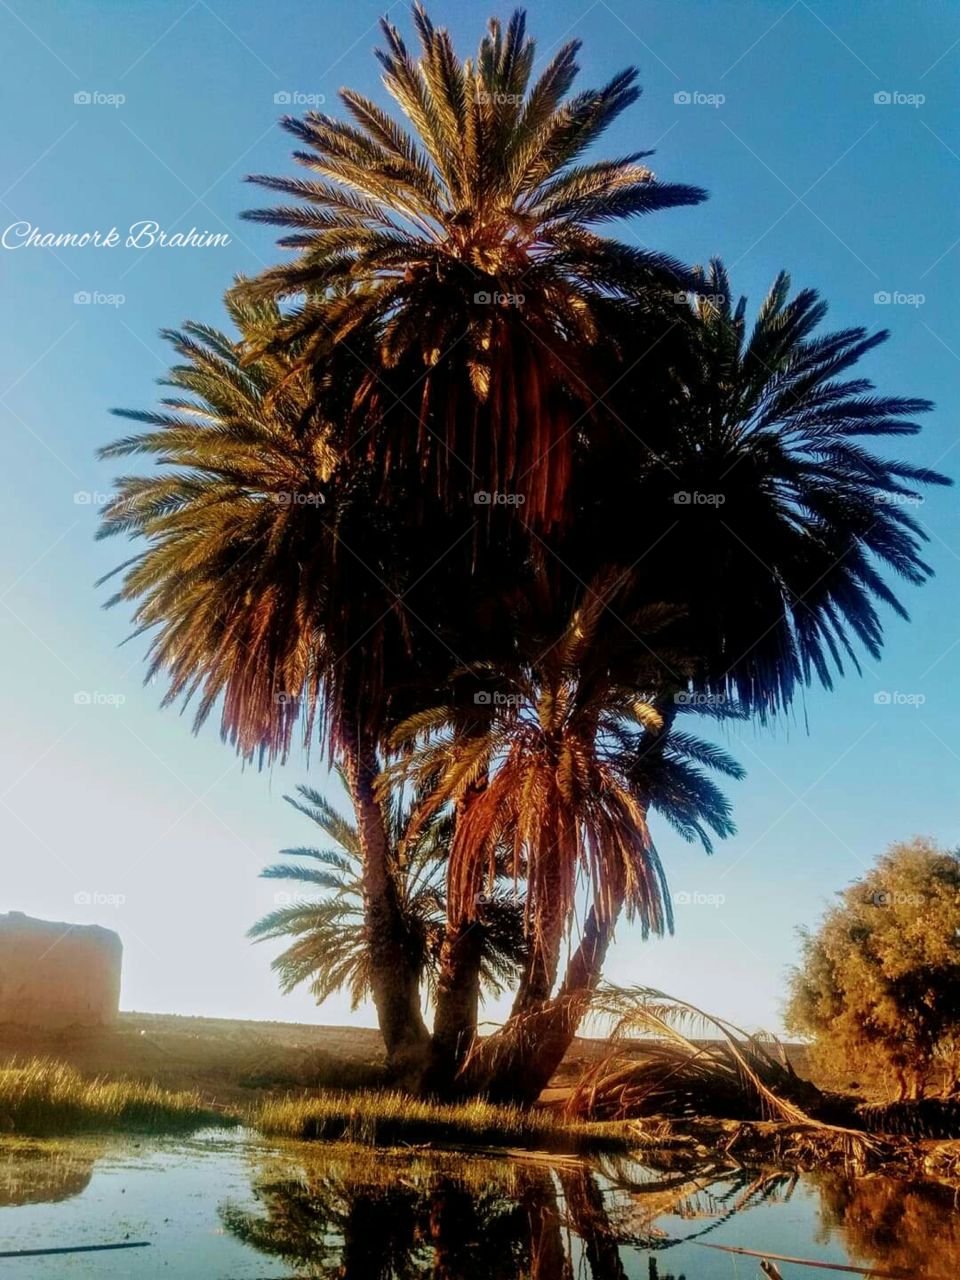 A palm tree in a oasis in the region of Guelmim